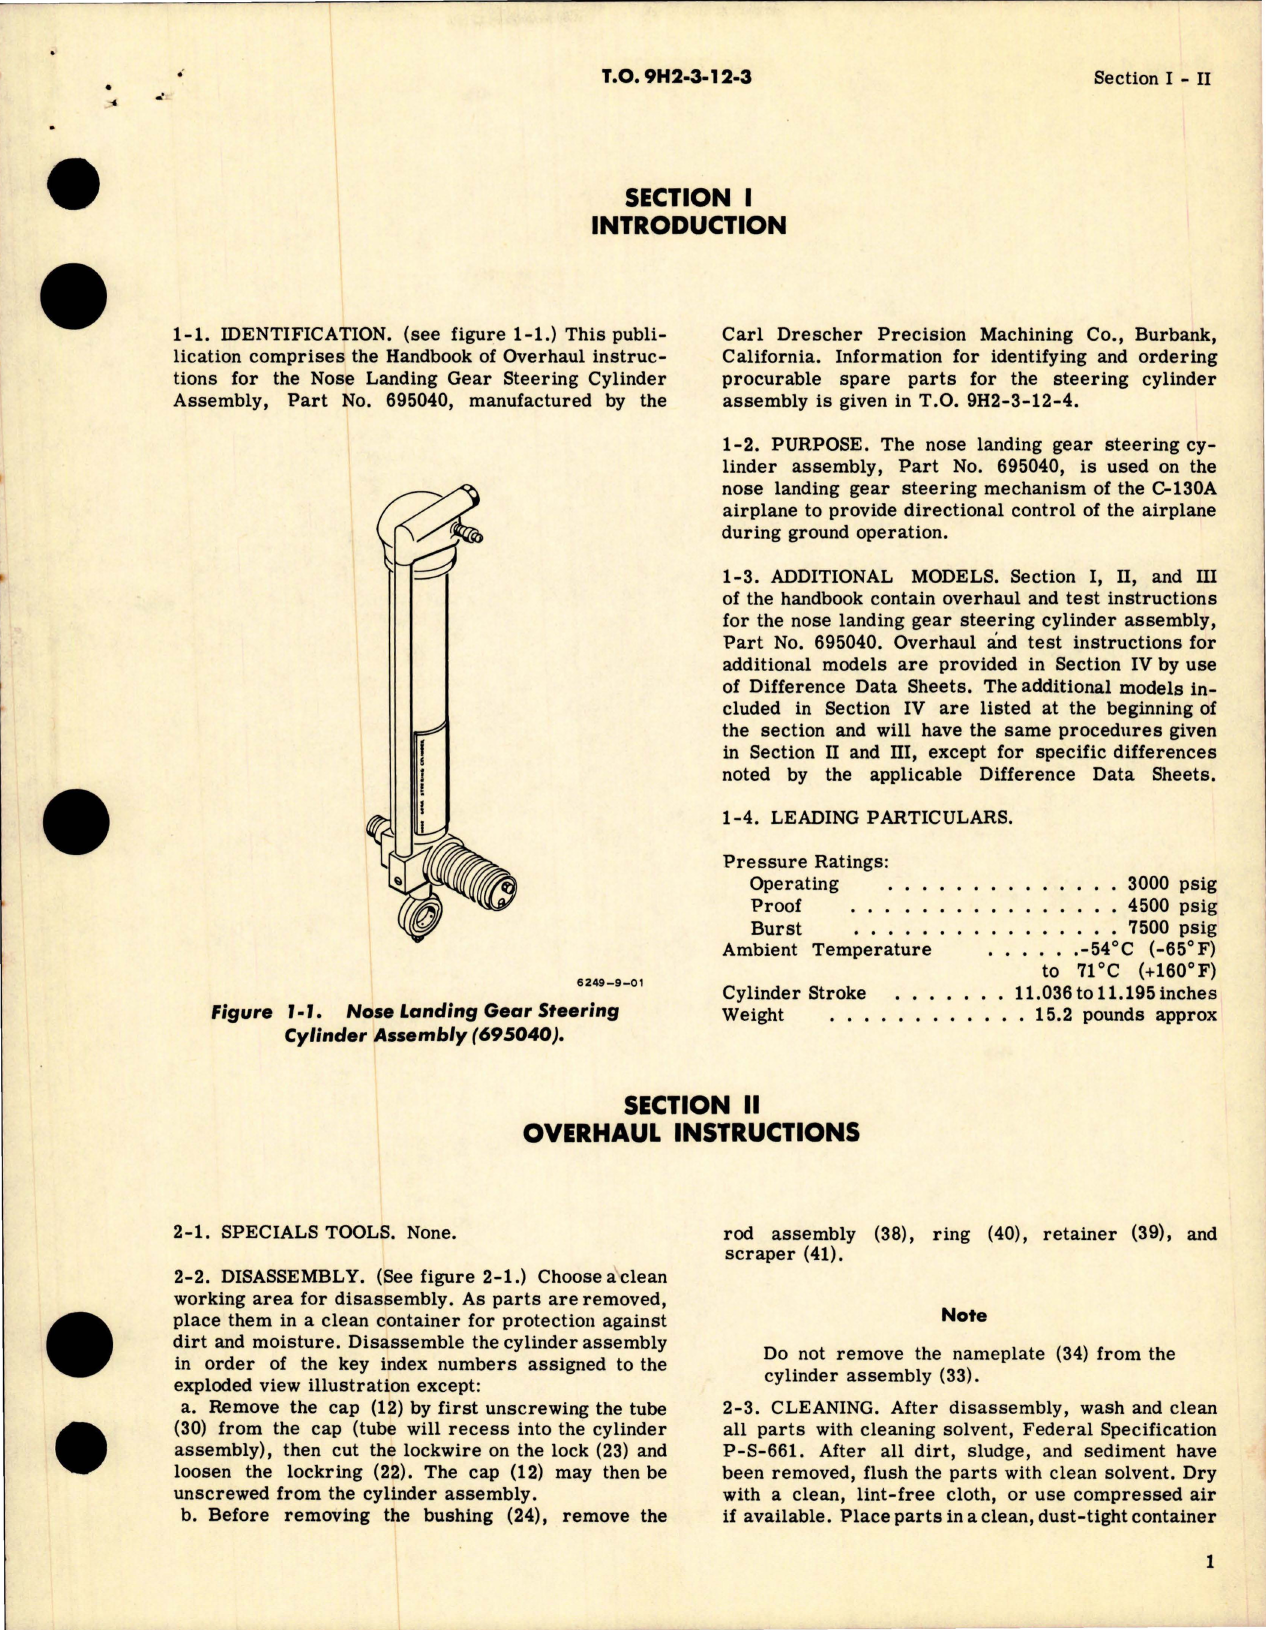 Sample page 5 from AirCorps Library document: Overhaul Instructions for Nose Landing Gear Steering Cylinder Assembly